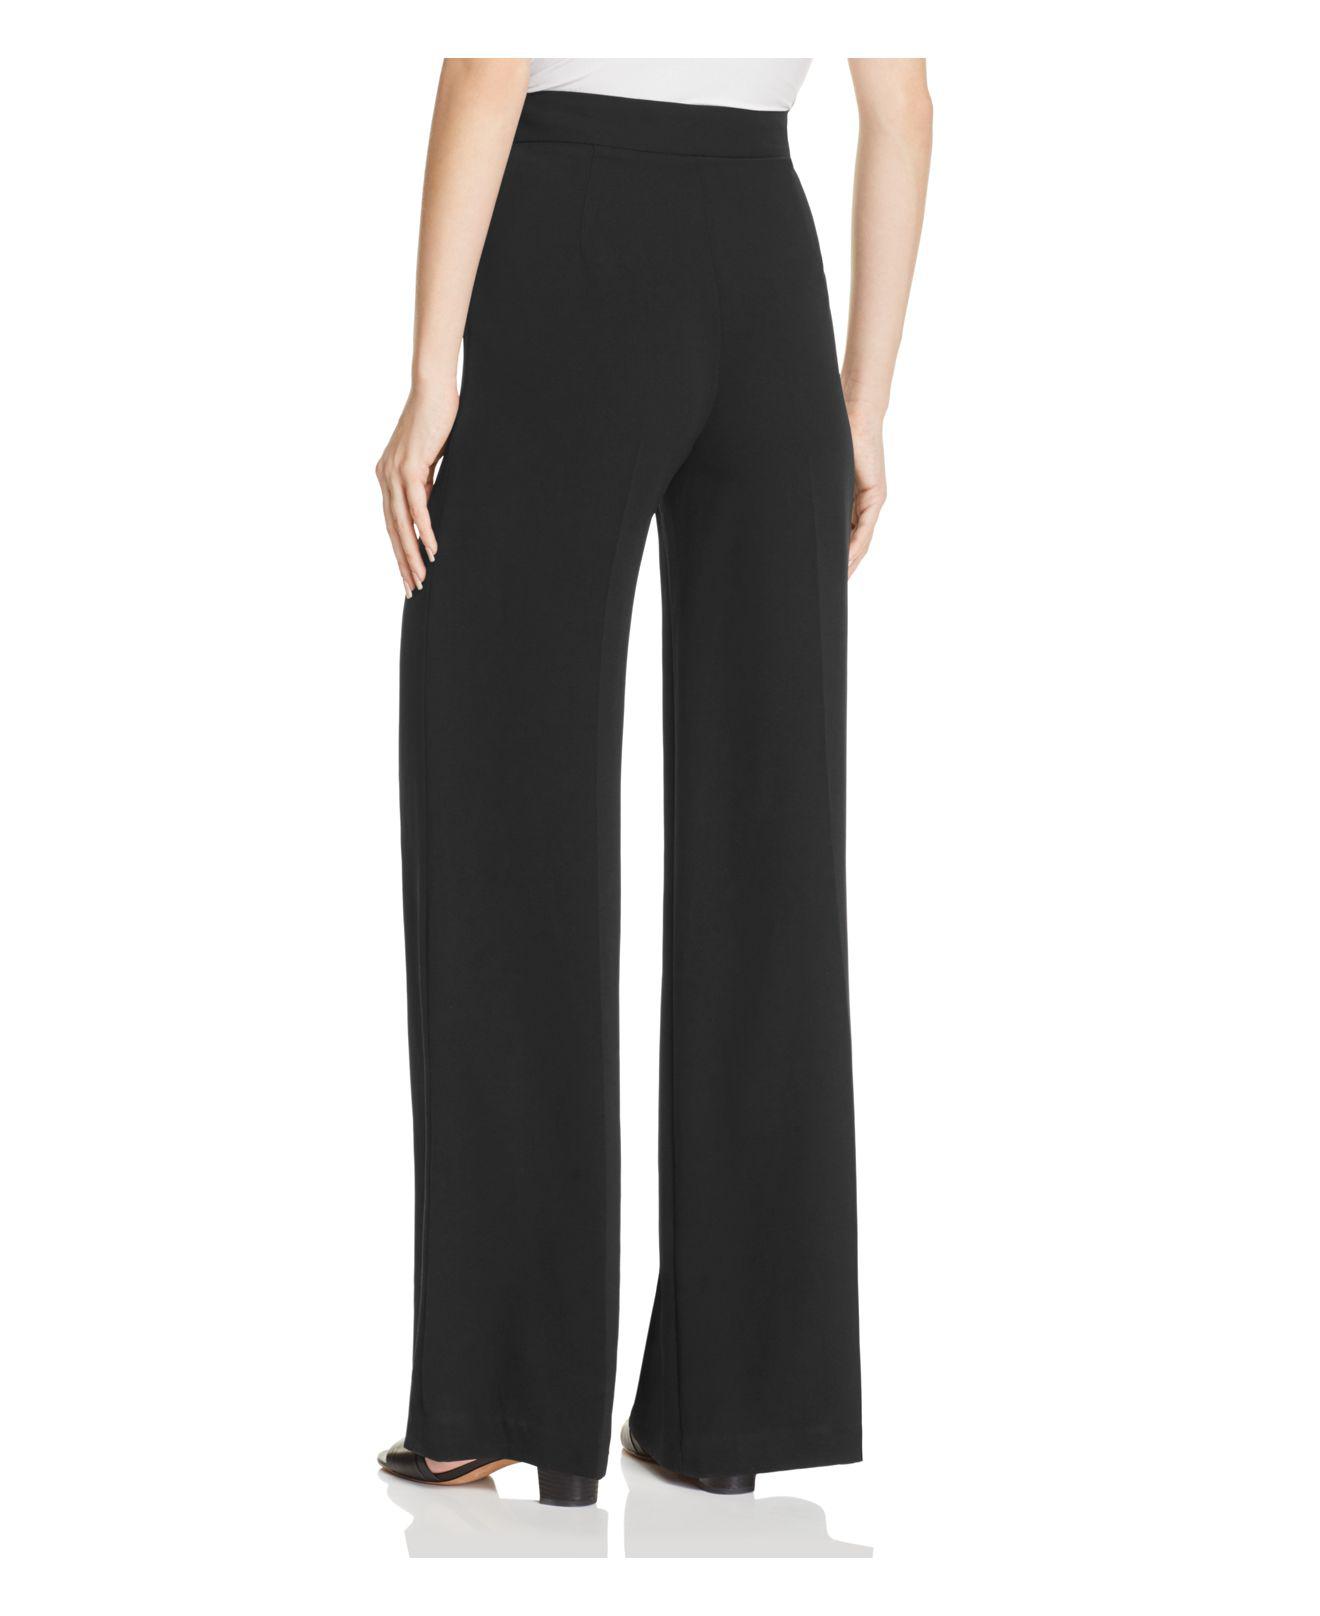 Theory Synthetic Terena High-waist Crepe Pants in Black - Lyst